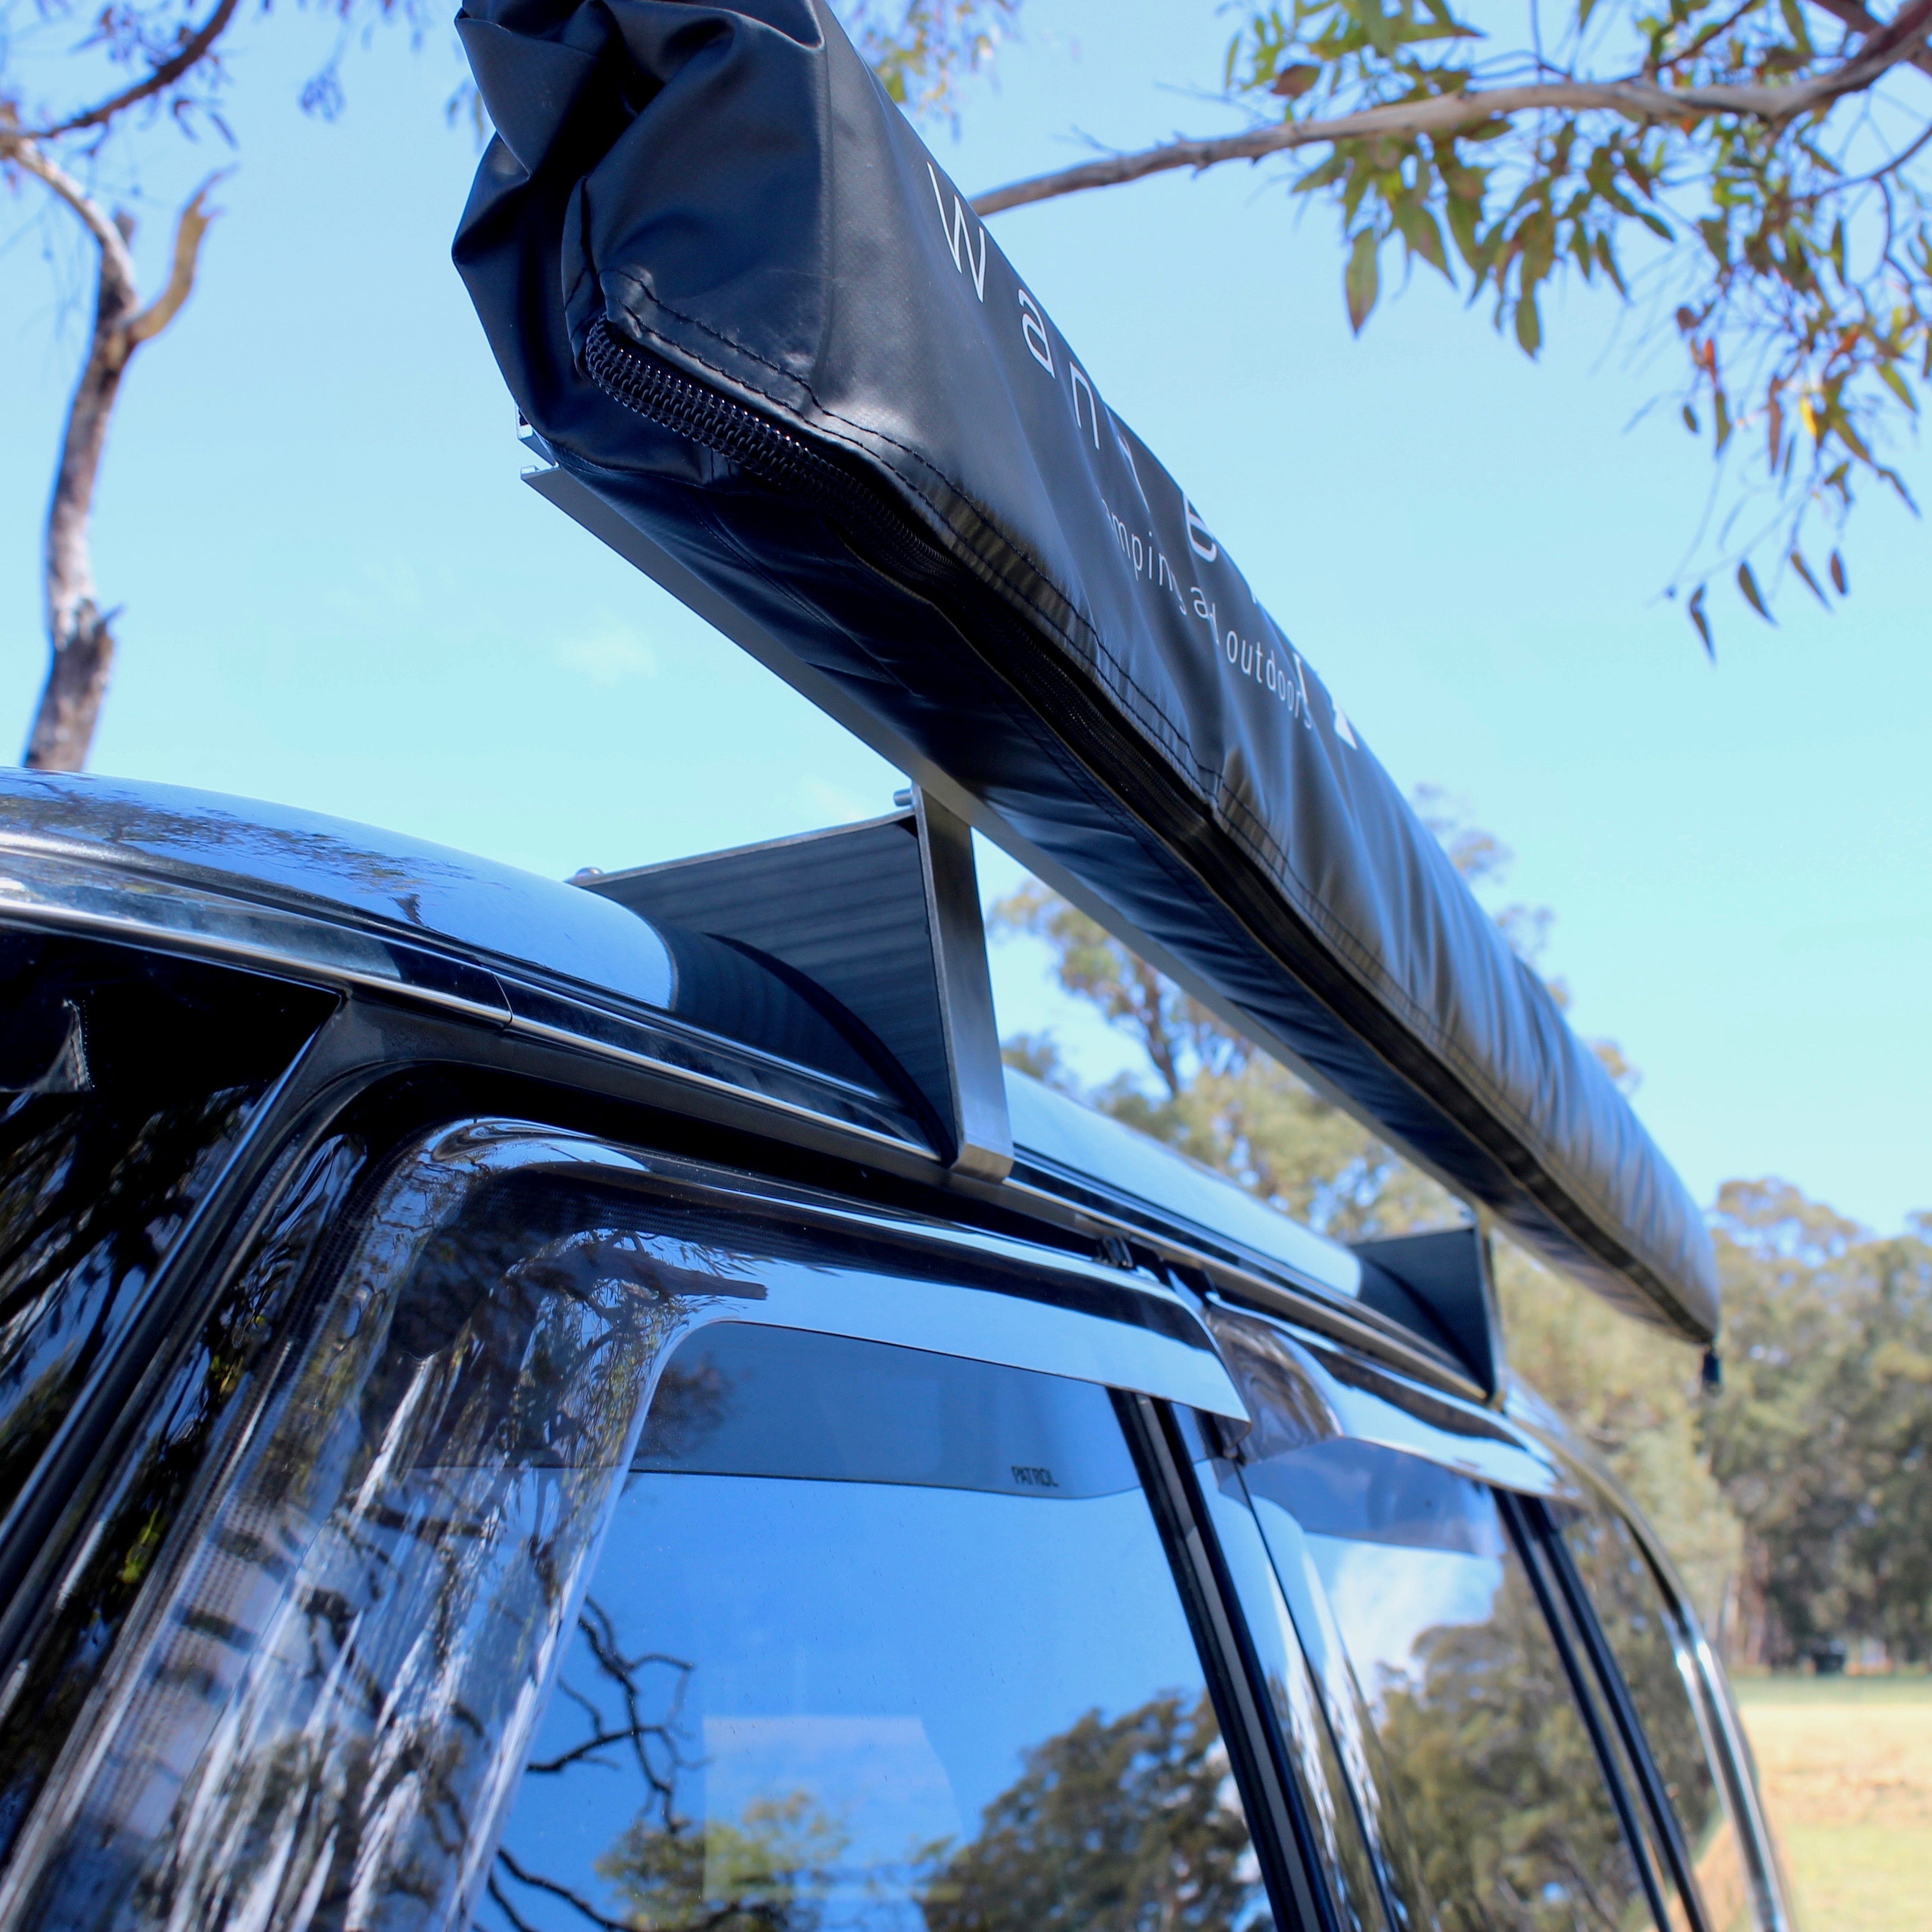 Nissan Patrol Y62 (2010-current) - Awning Mount System